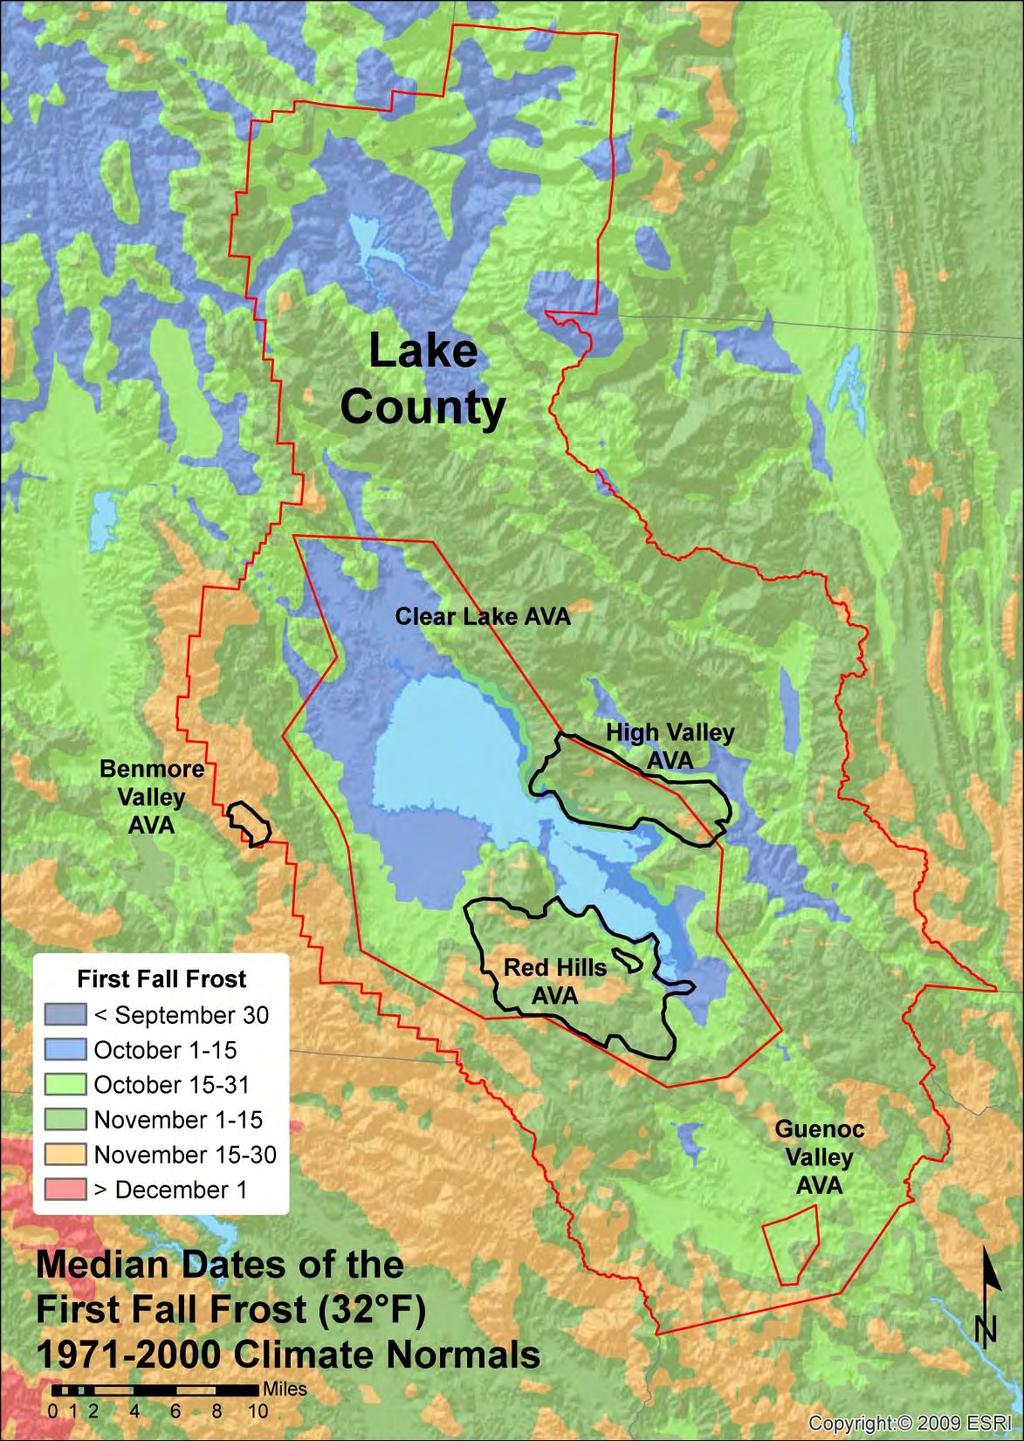 First Fall Frost (date/days) AVA Name Median Max Min Range Clear Lake 3-Nov 7-Dec 22-Oct 46 Guenoc Valley 10-Nov 4-Dec